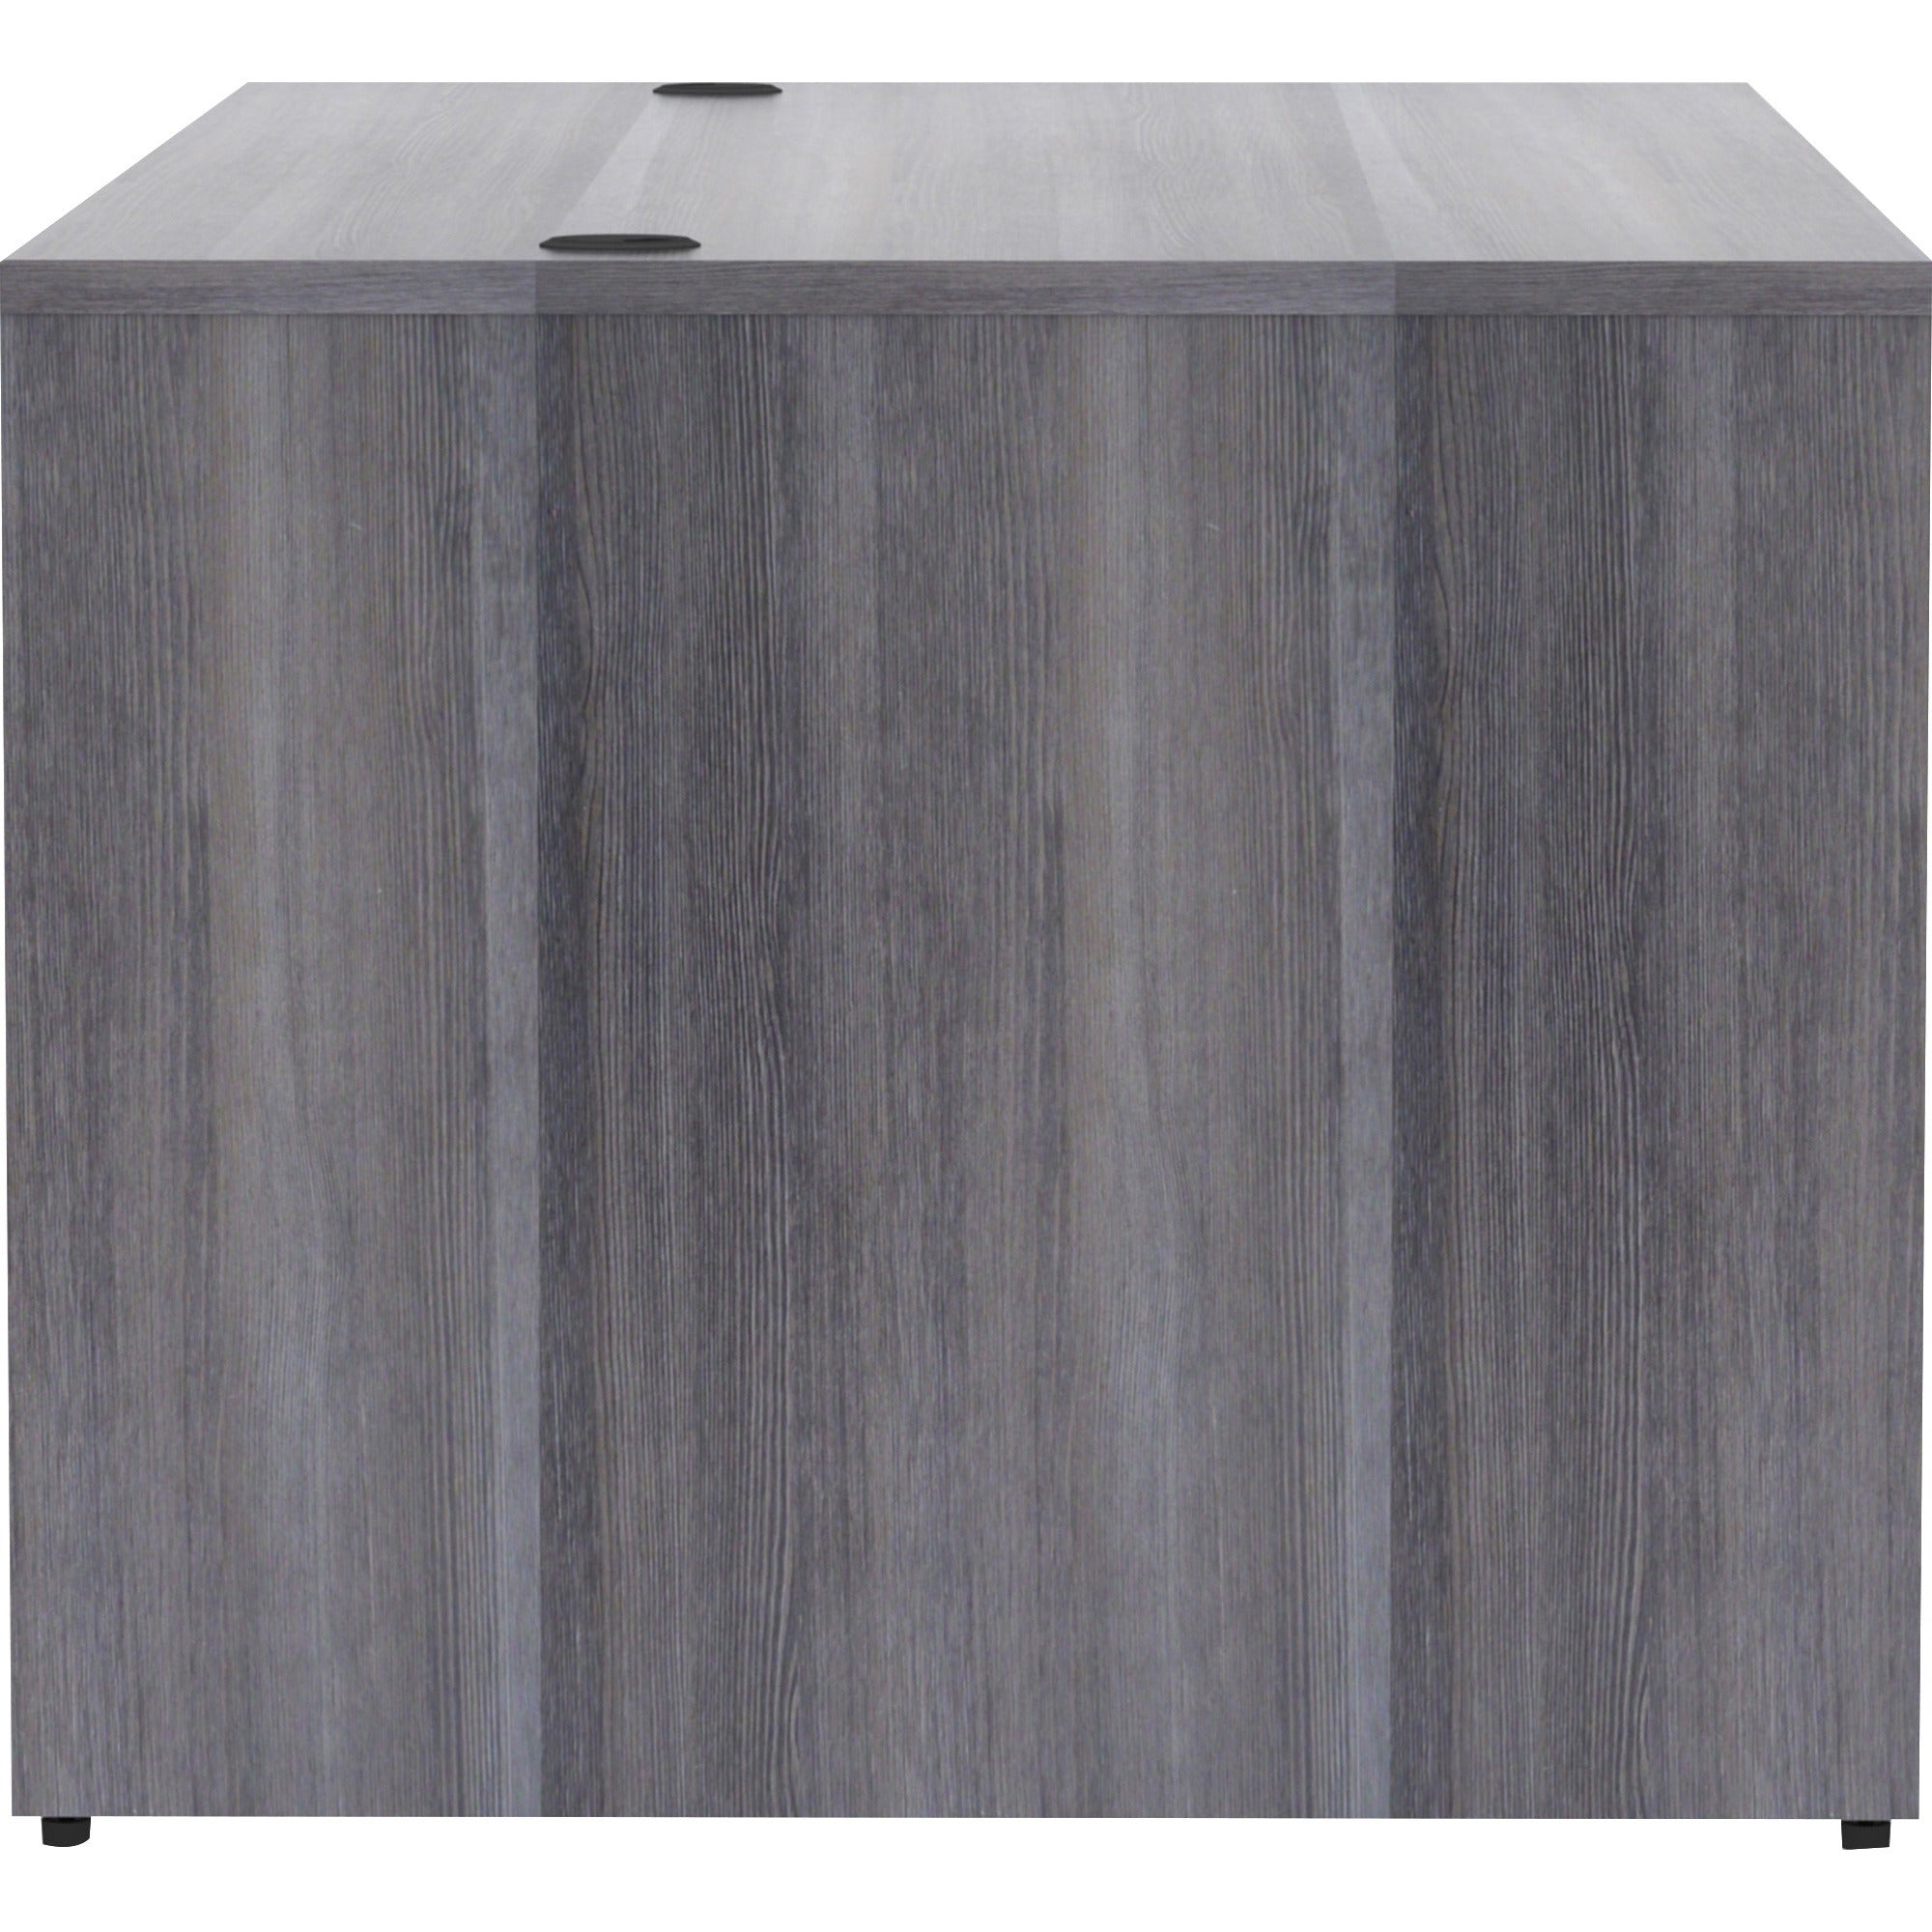 lorell-essentials-series-rectangular-desk-shell-72-x-36295--1-top-laminate-weathered-charcoal-table-top-grommet_llr69550 - 2